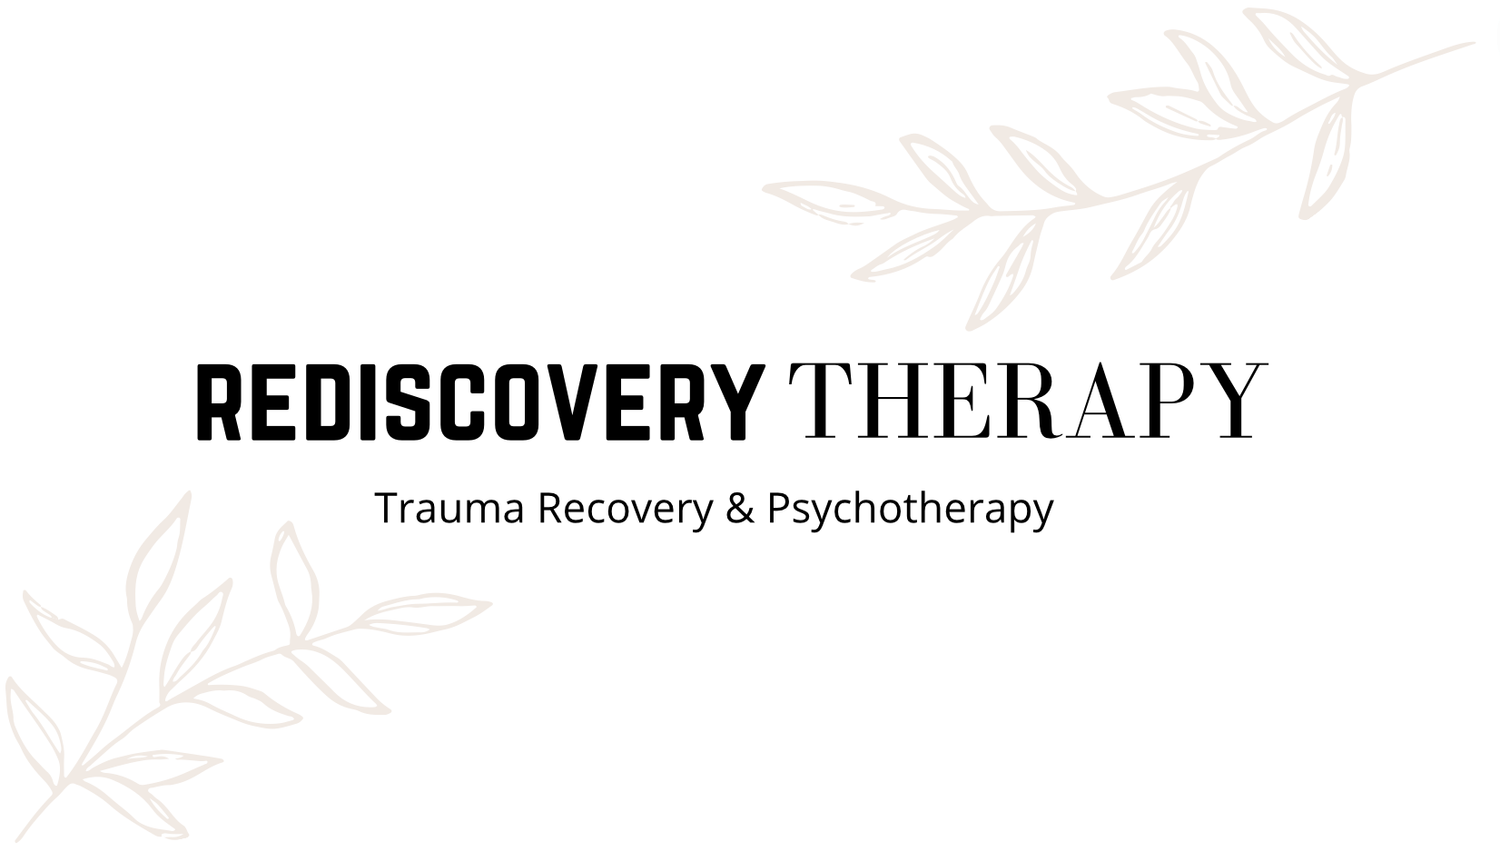 Rediscovery Therapy